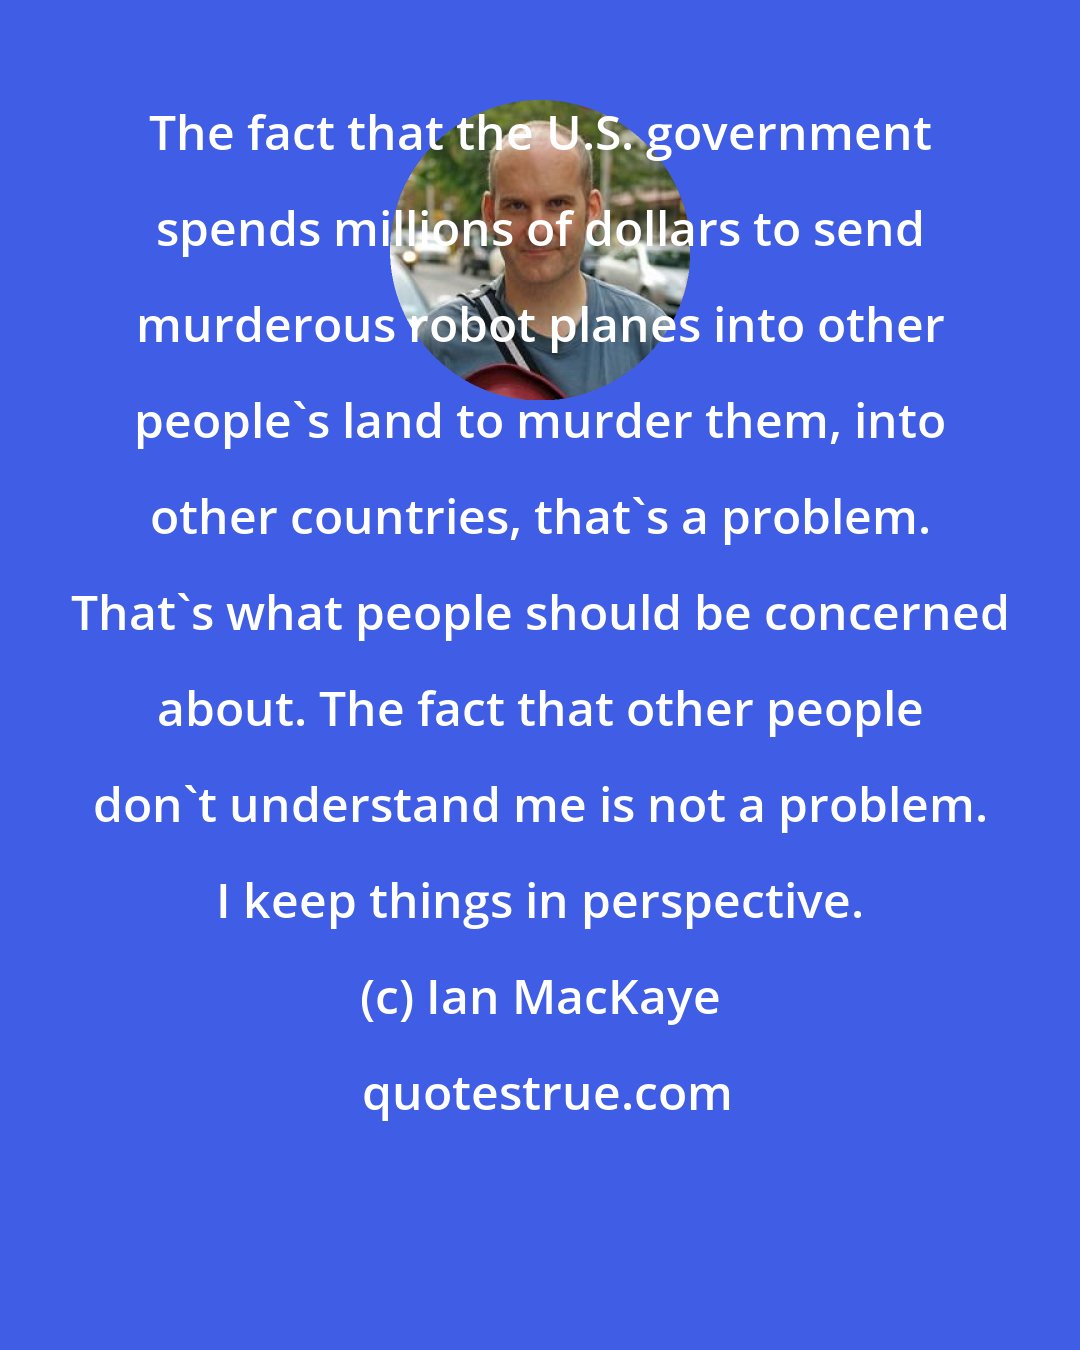 Ian MacKaye: The fact that the U.S. government spends millions of dollars to send murderous robot planes into other people's land to murder them, into other countries, that's a problem. That's what people should be concerned about. The fact that other people don't understand me is not a problem. I keep things in perspective.